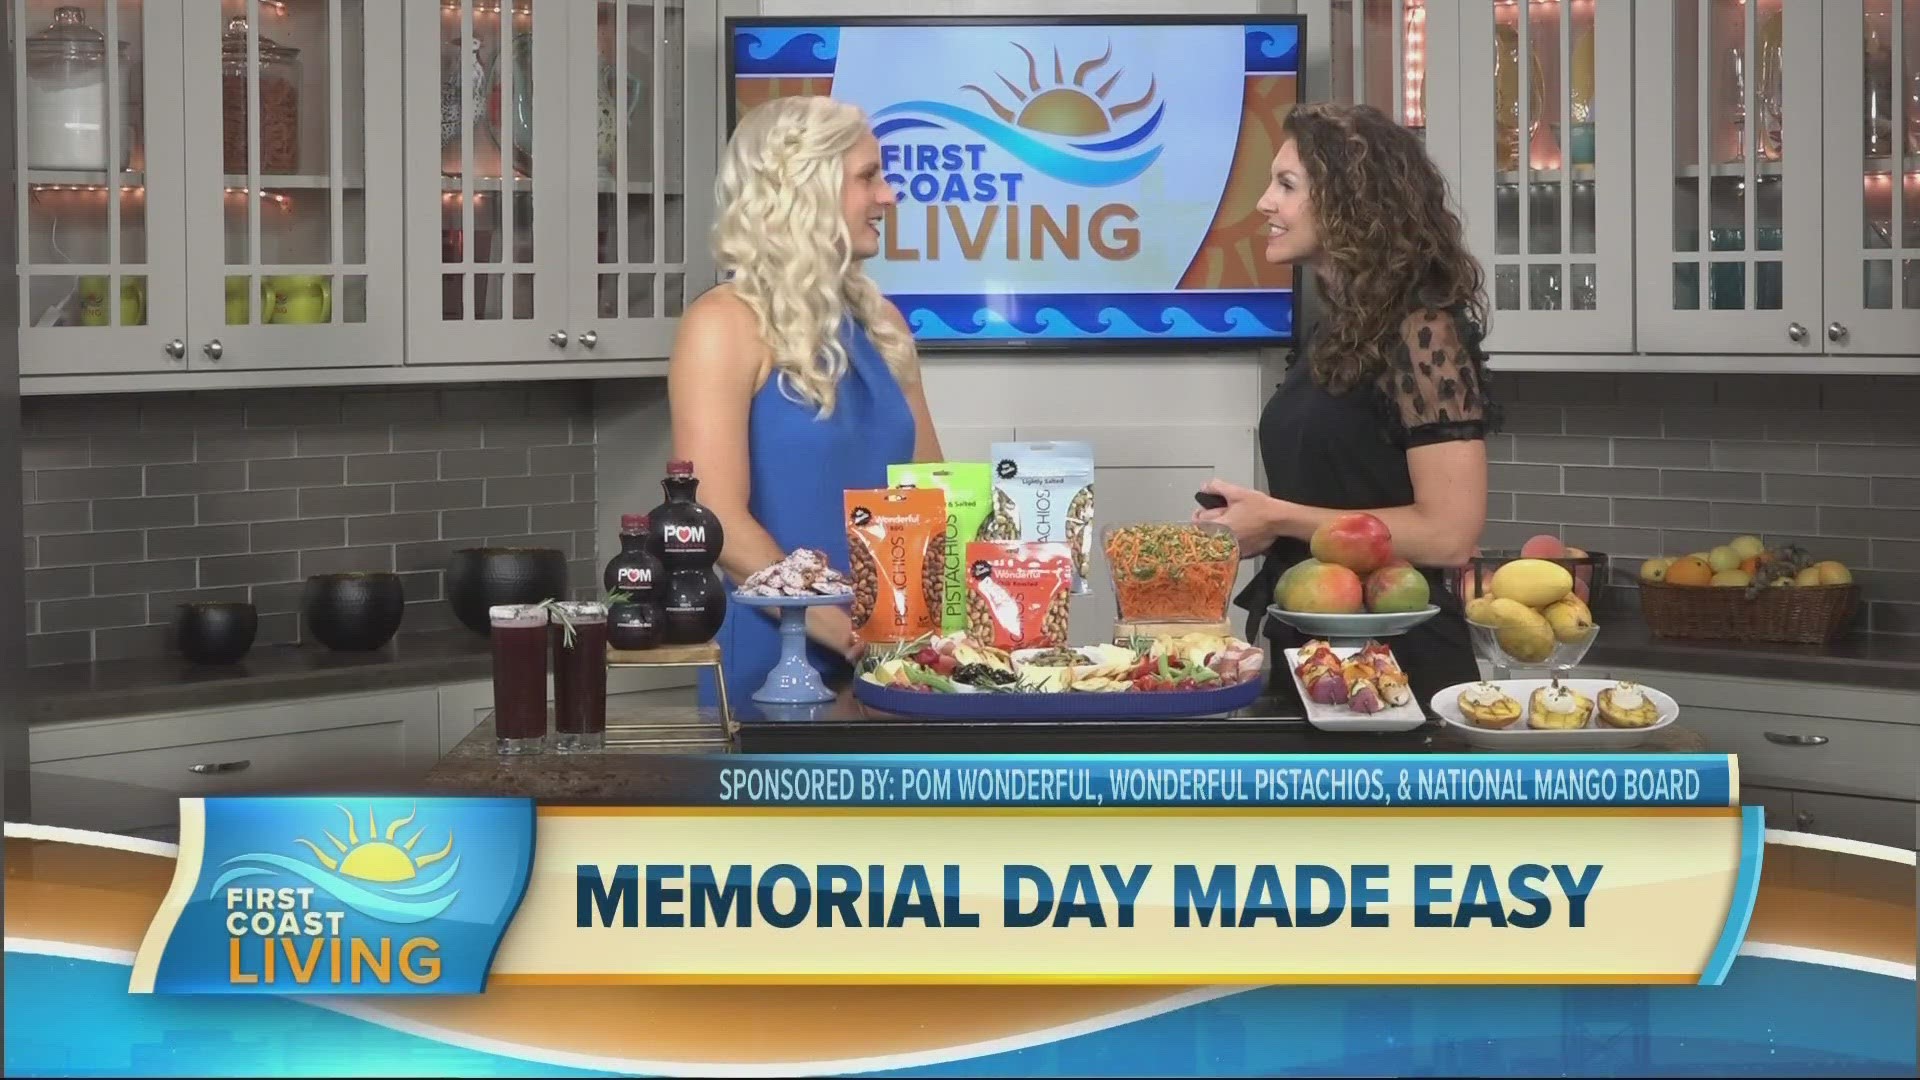 Registered Dietitian Nutritionist, Jenna Braddock shares easy delicious and nutritious snacks and sides.